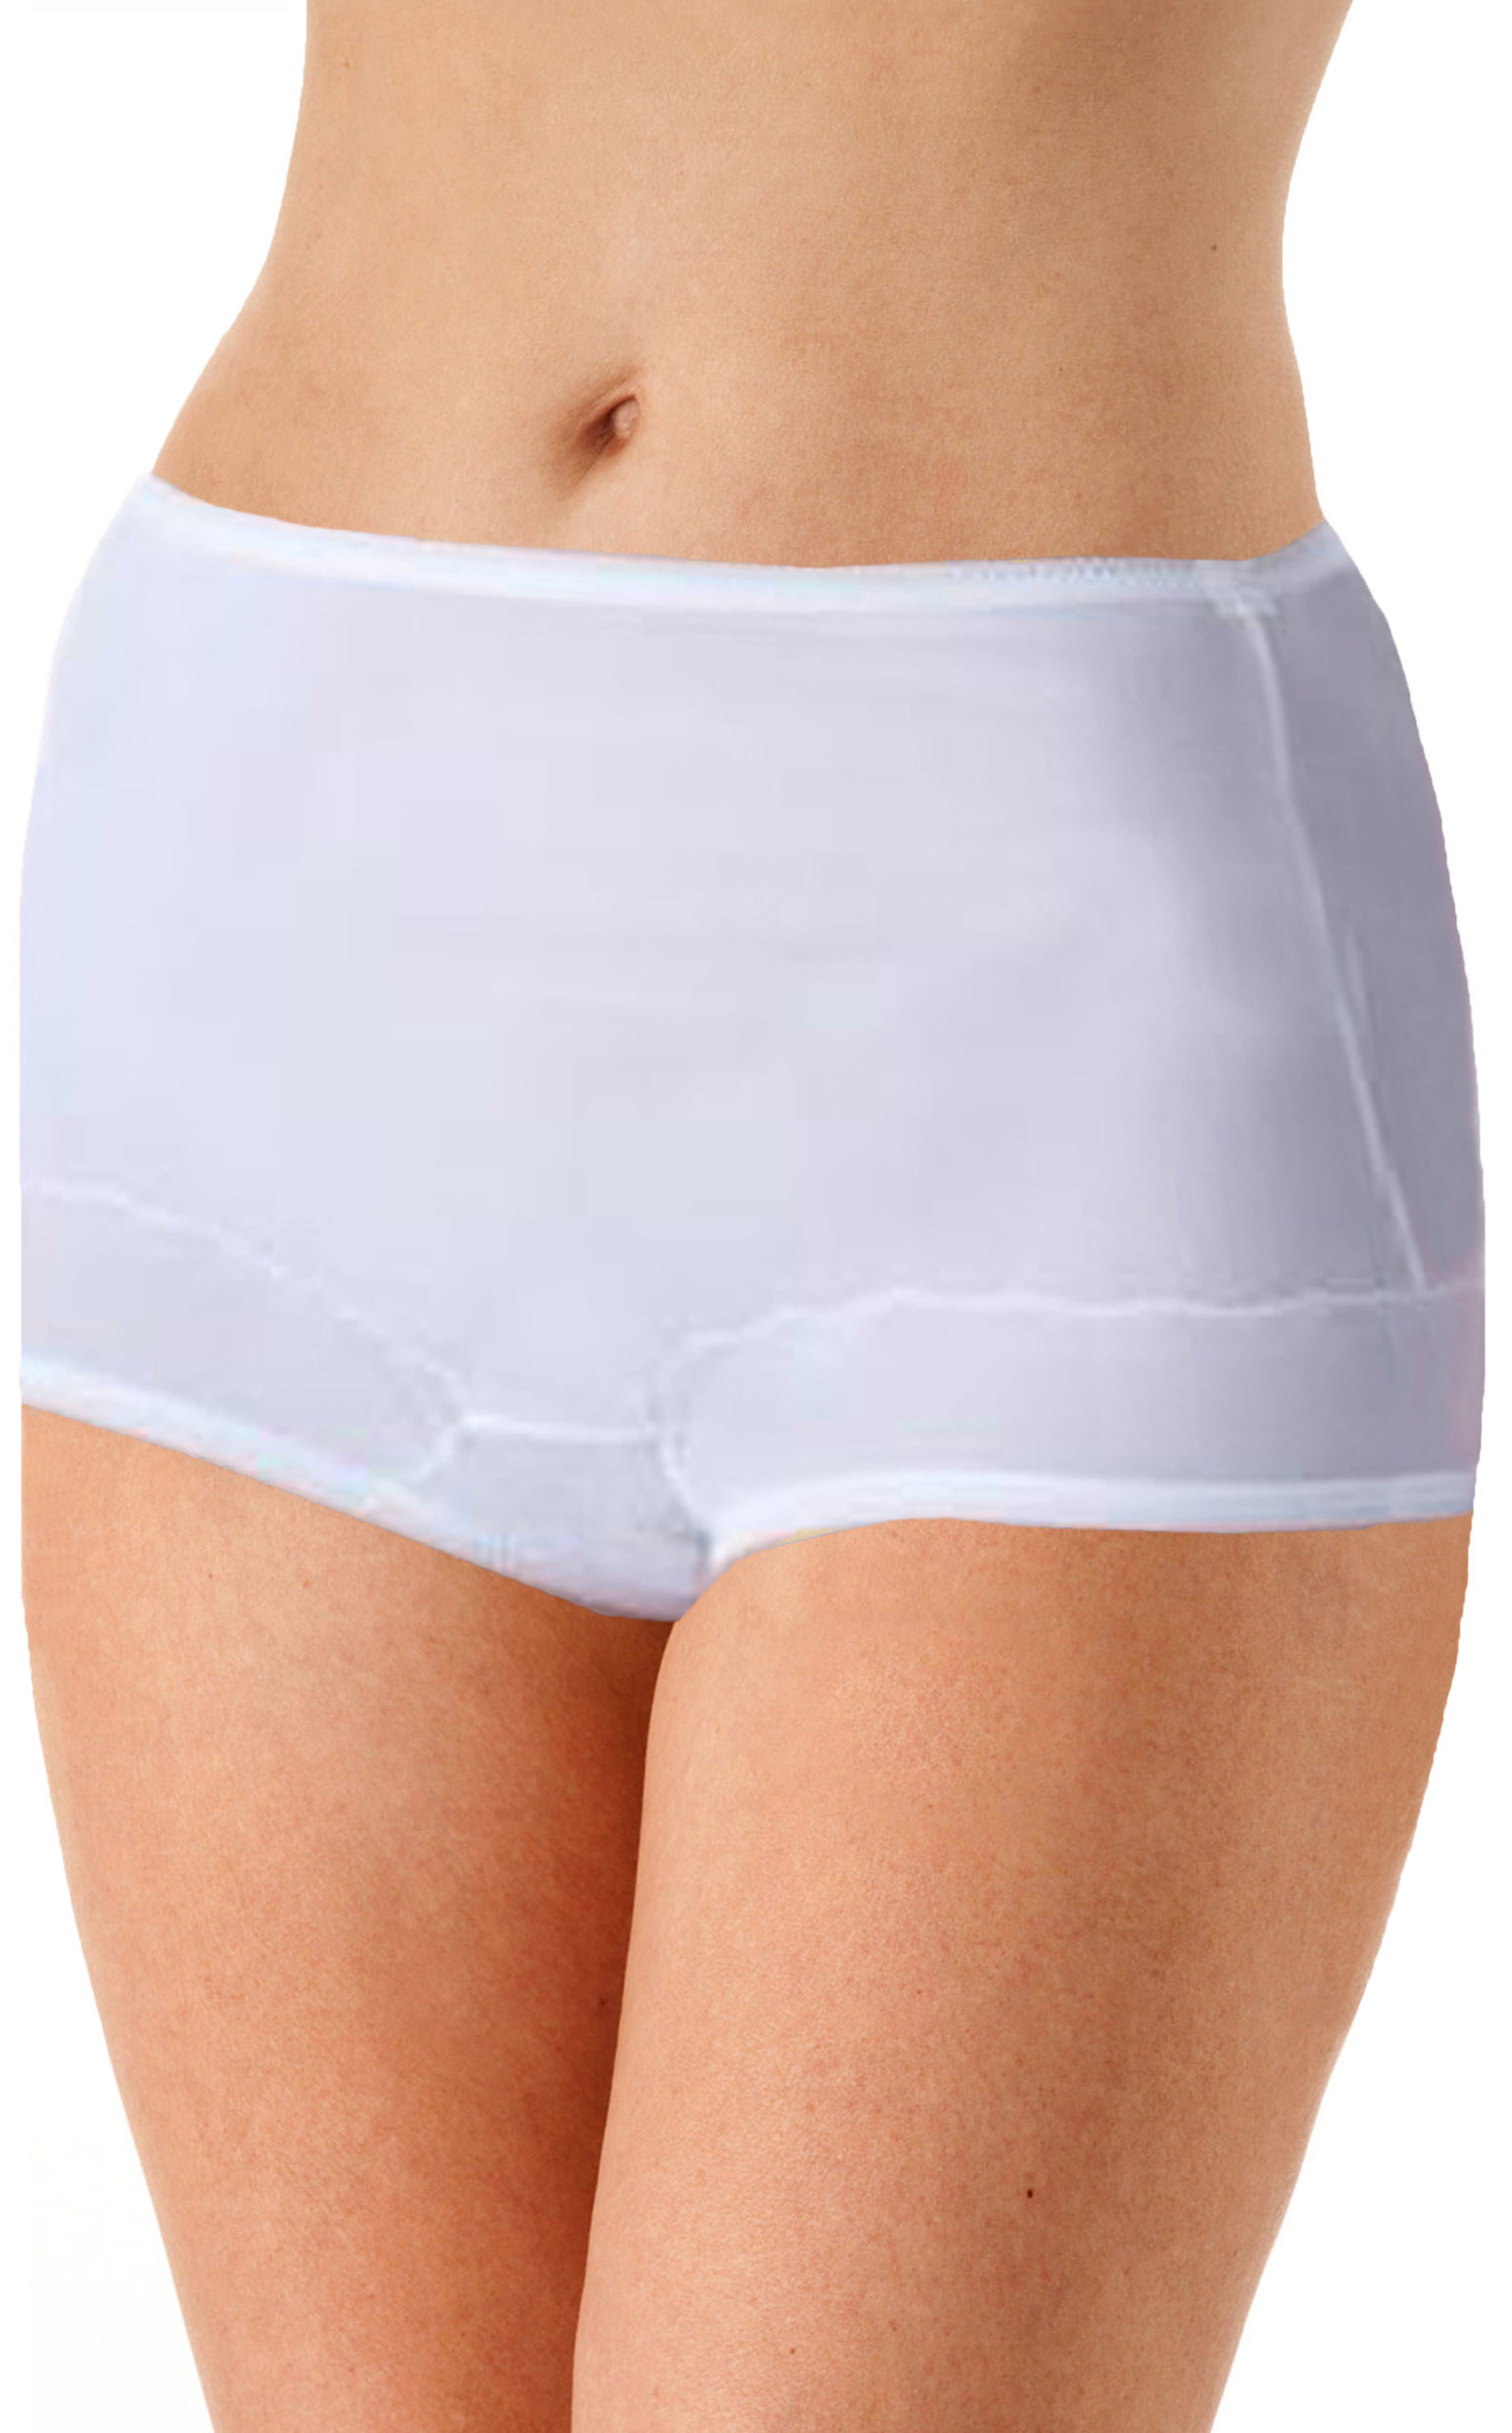 granny knickers  Ladies Granny Style Knickers Smooth Satin High